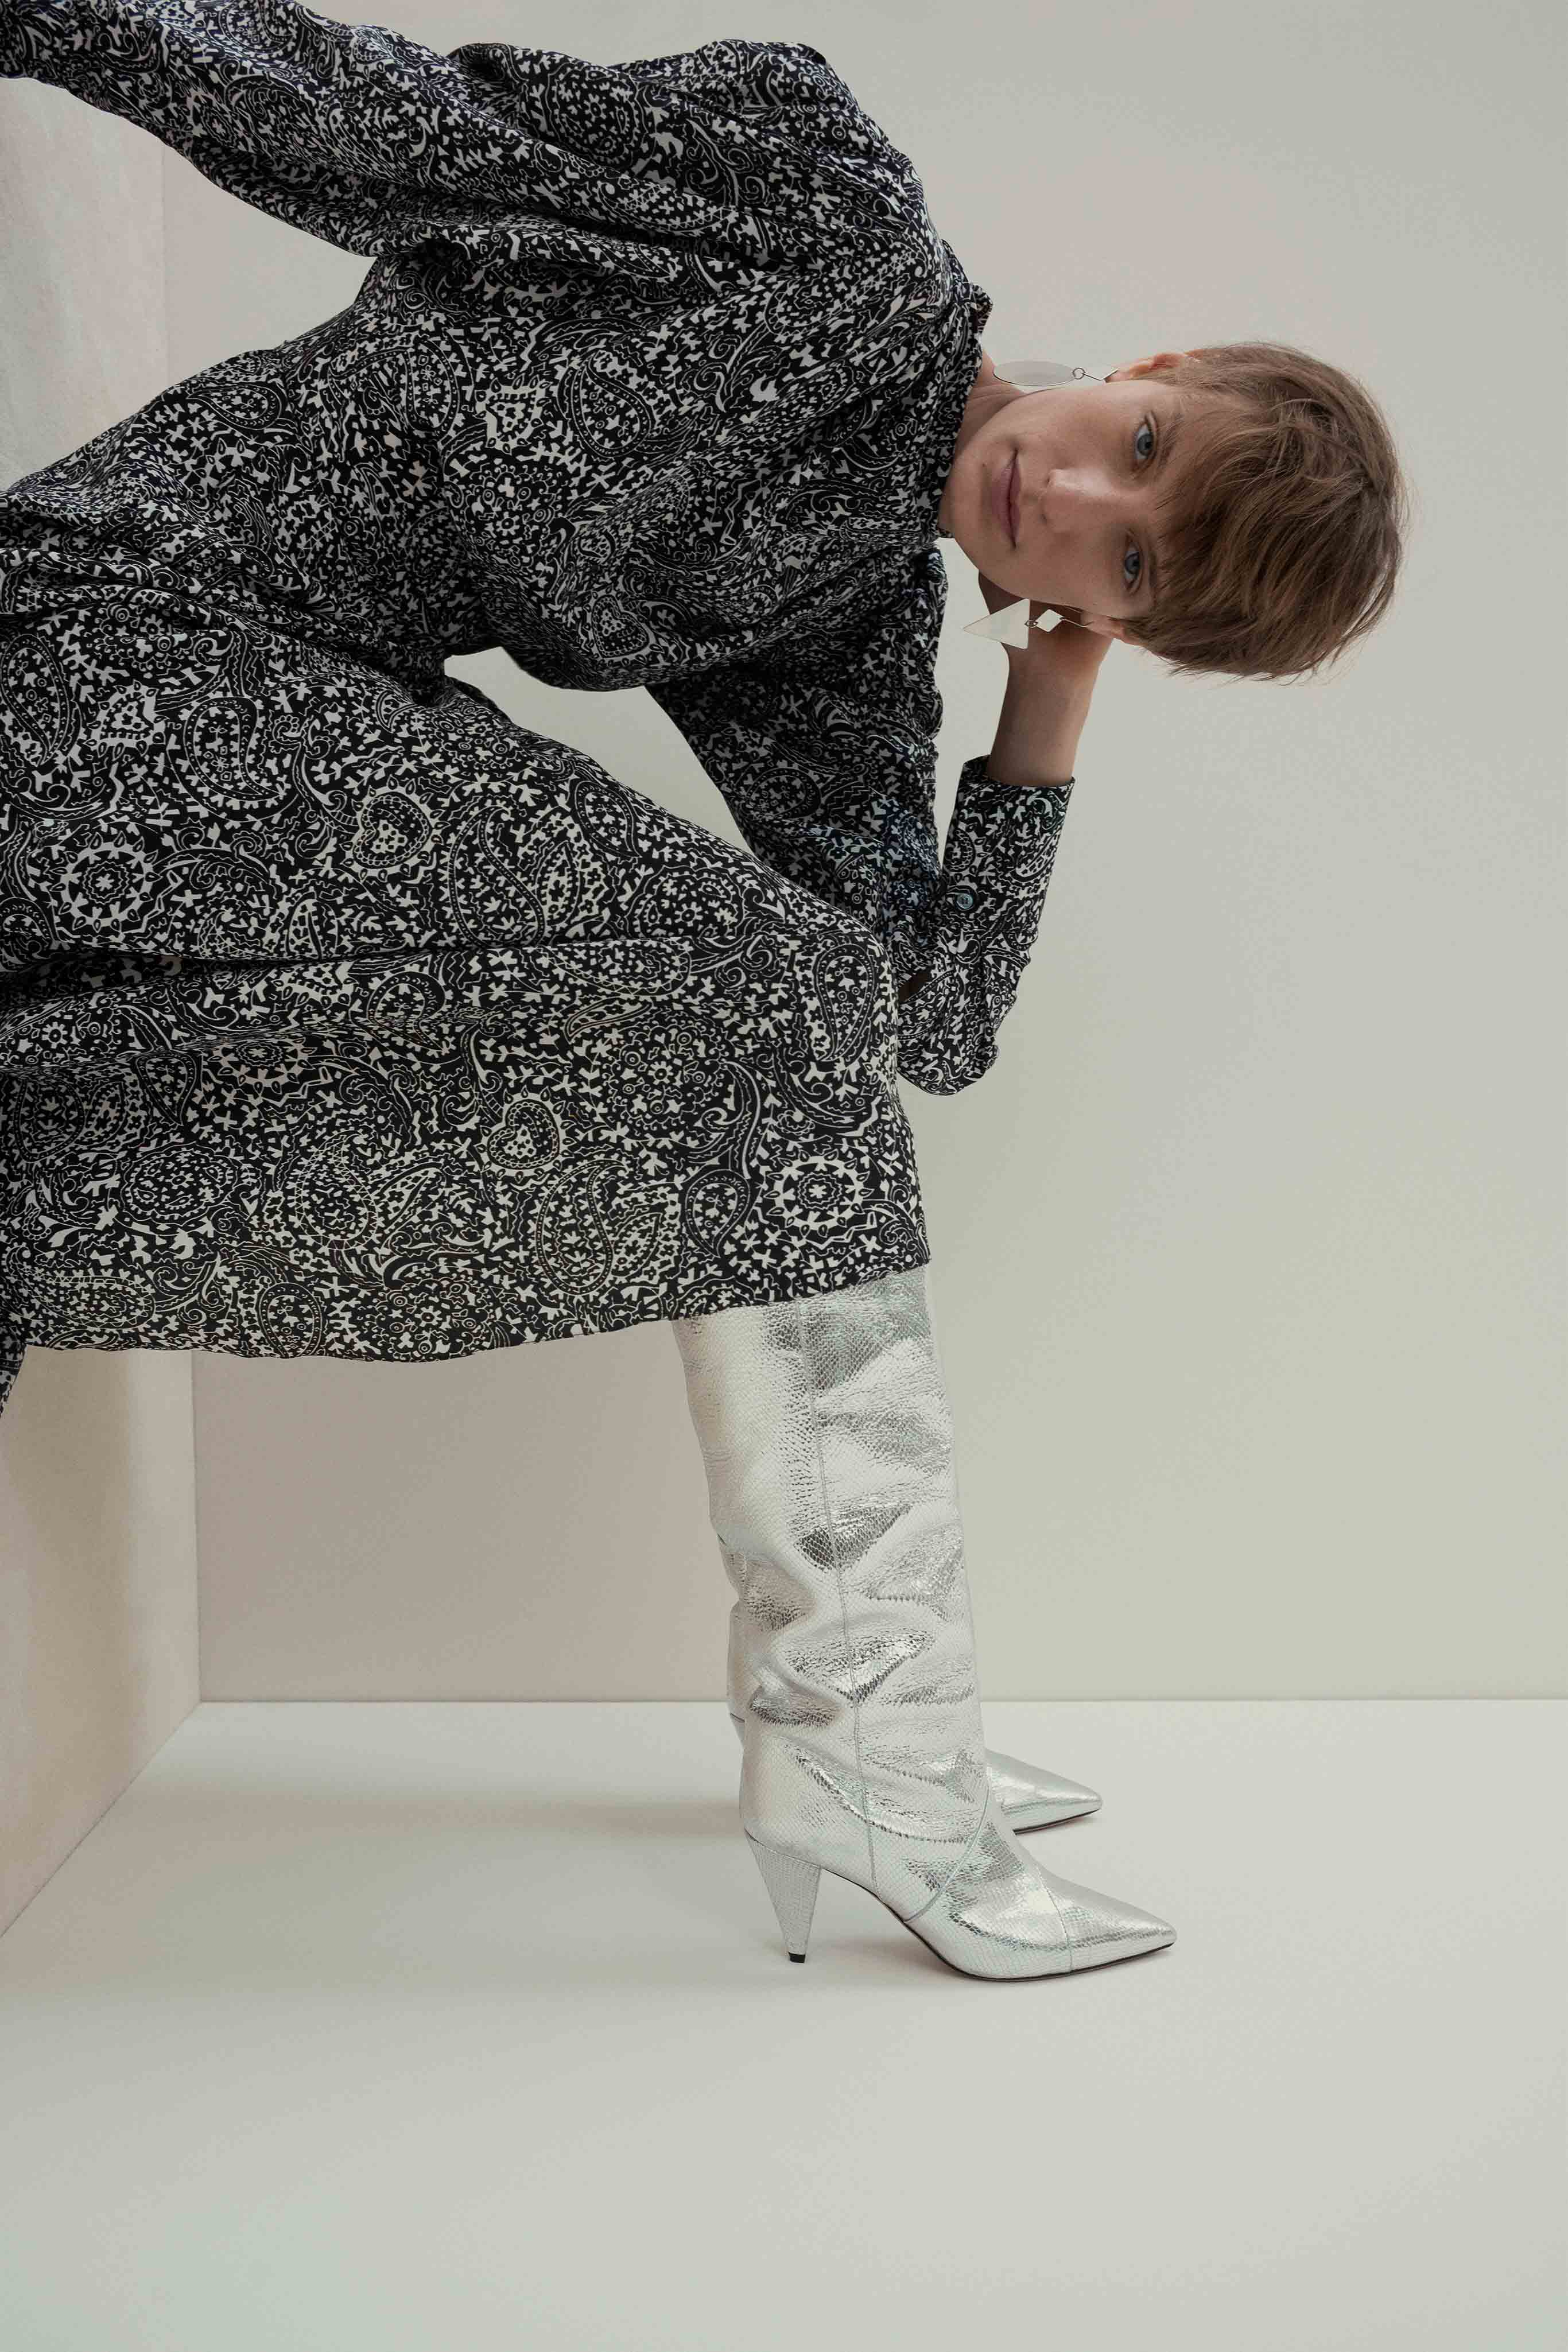 Isabel Marant Best trends from the resort 2020 collections vogue  a touch of metallic